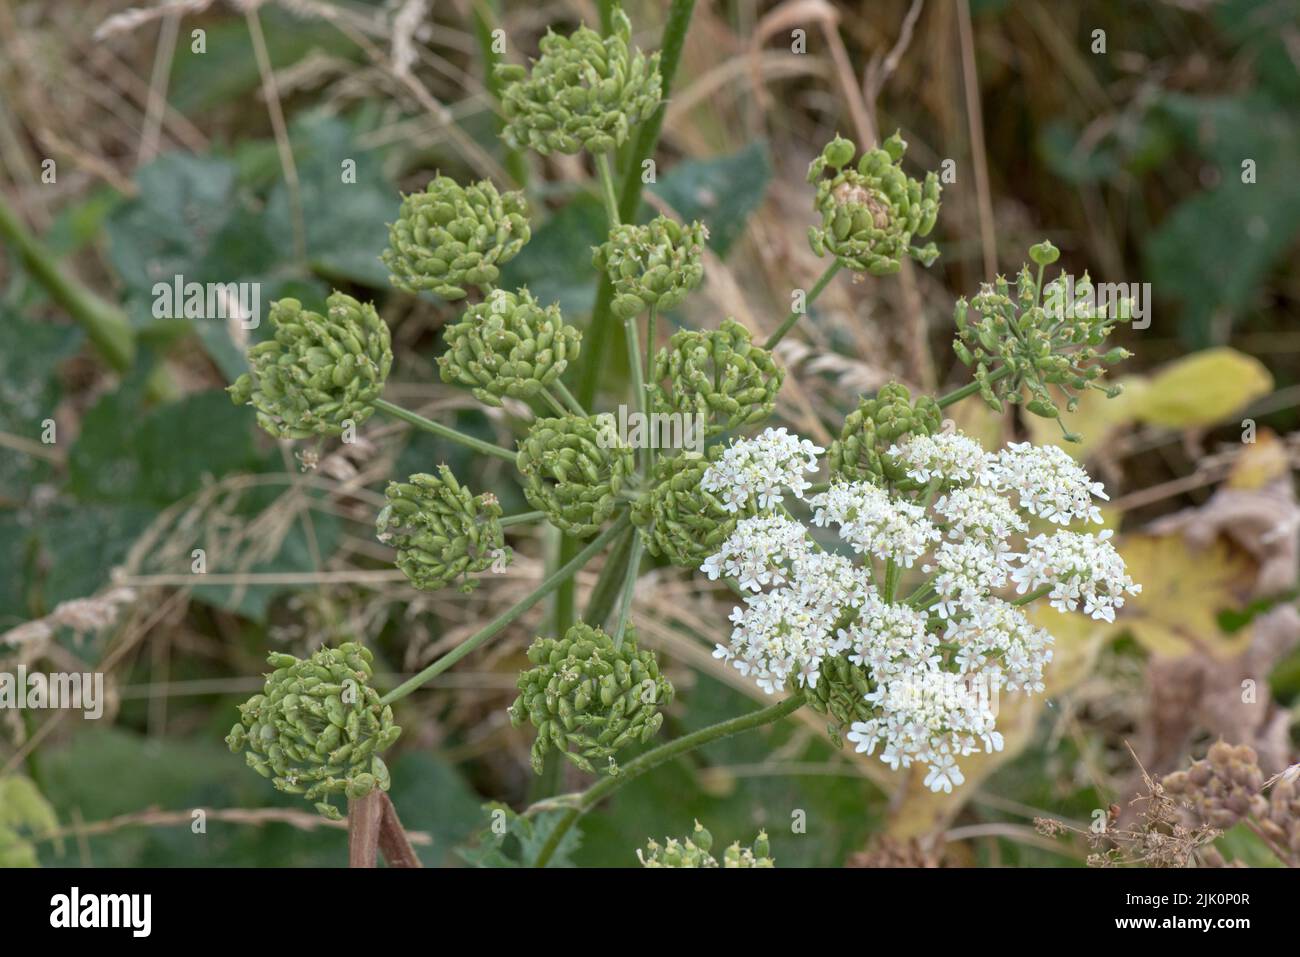 Green unripe and brown ripening seed heads of common hogweed and white flower (Heracleum sphondylium) umbel, Berkshire, July Stock Photo